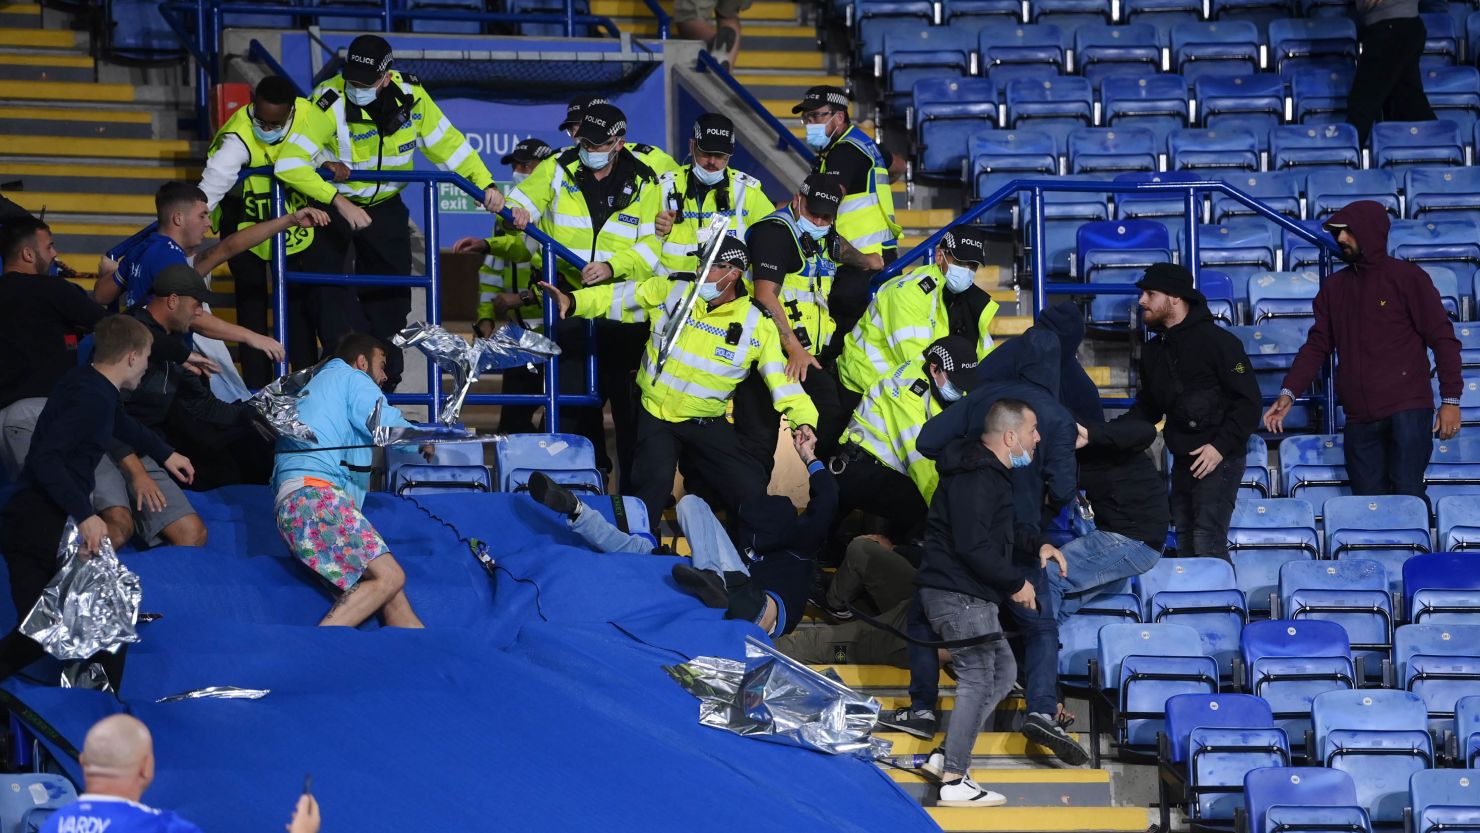 Fans from both side's clash as police intervene inside the King Power Stadium.